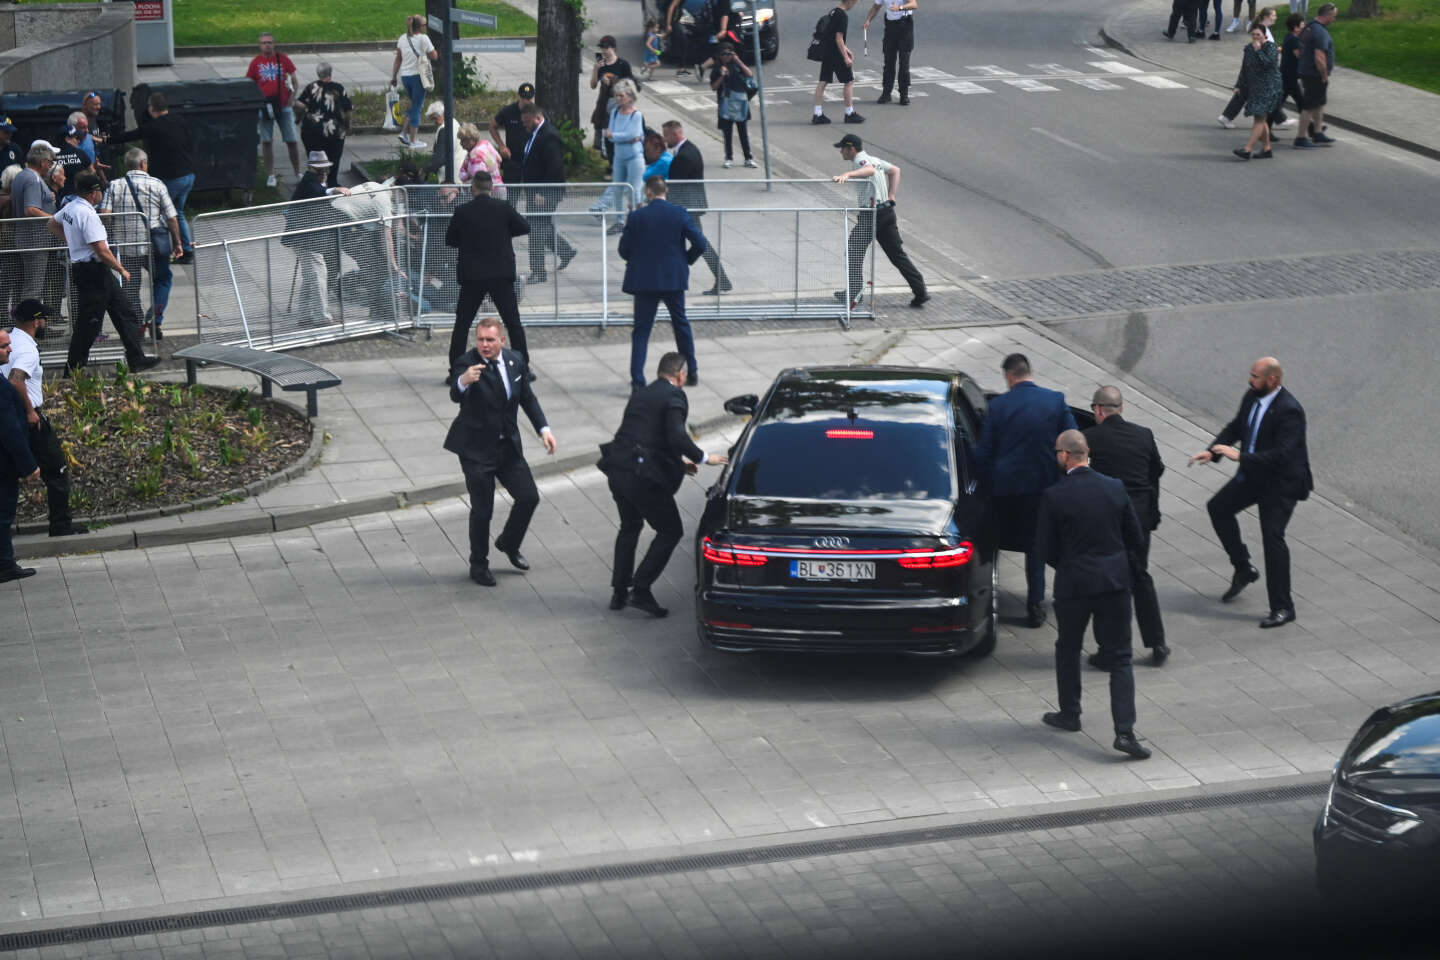 Slovak Prime Minister Robert Fico was shot and wounded